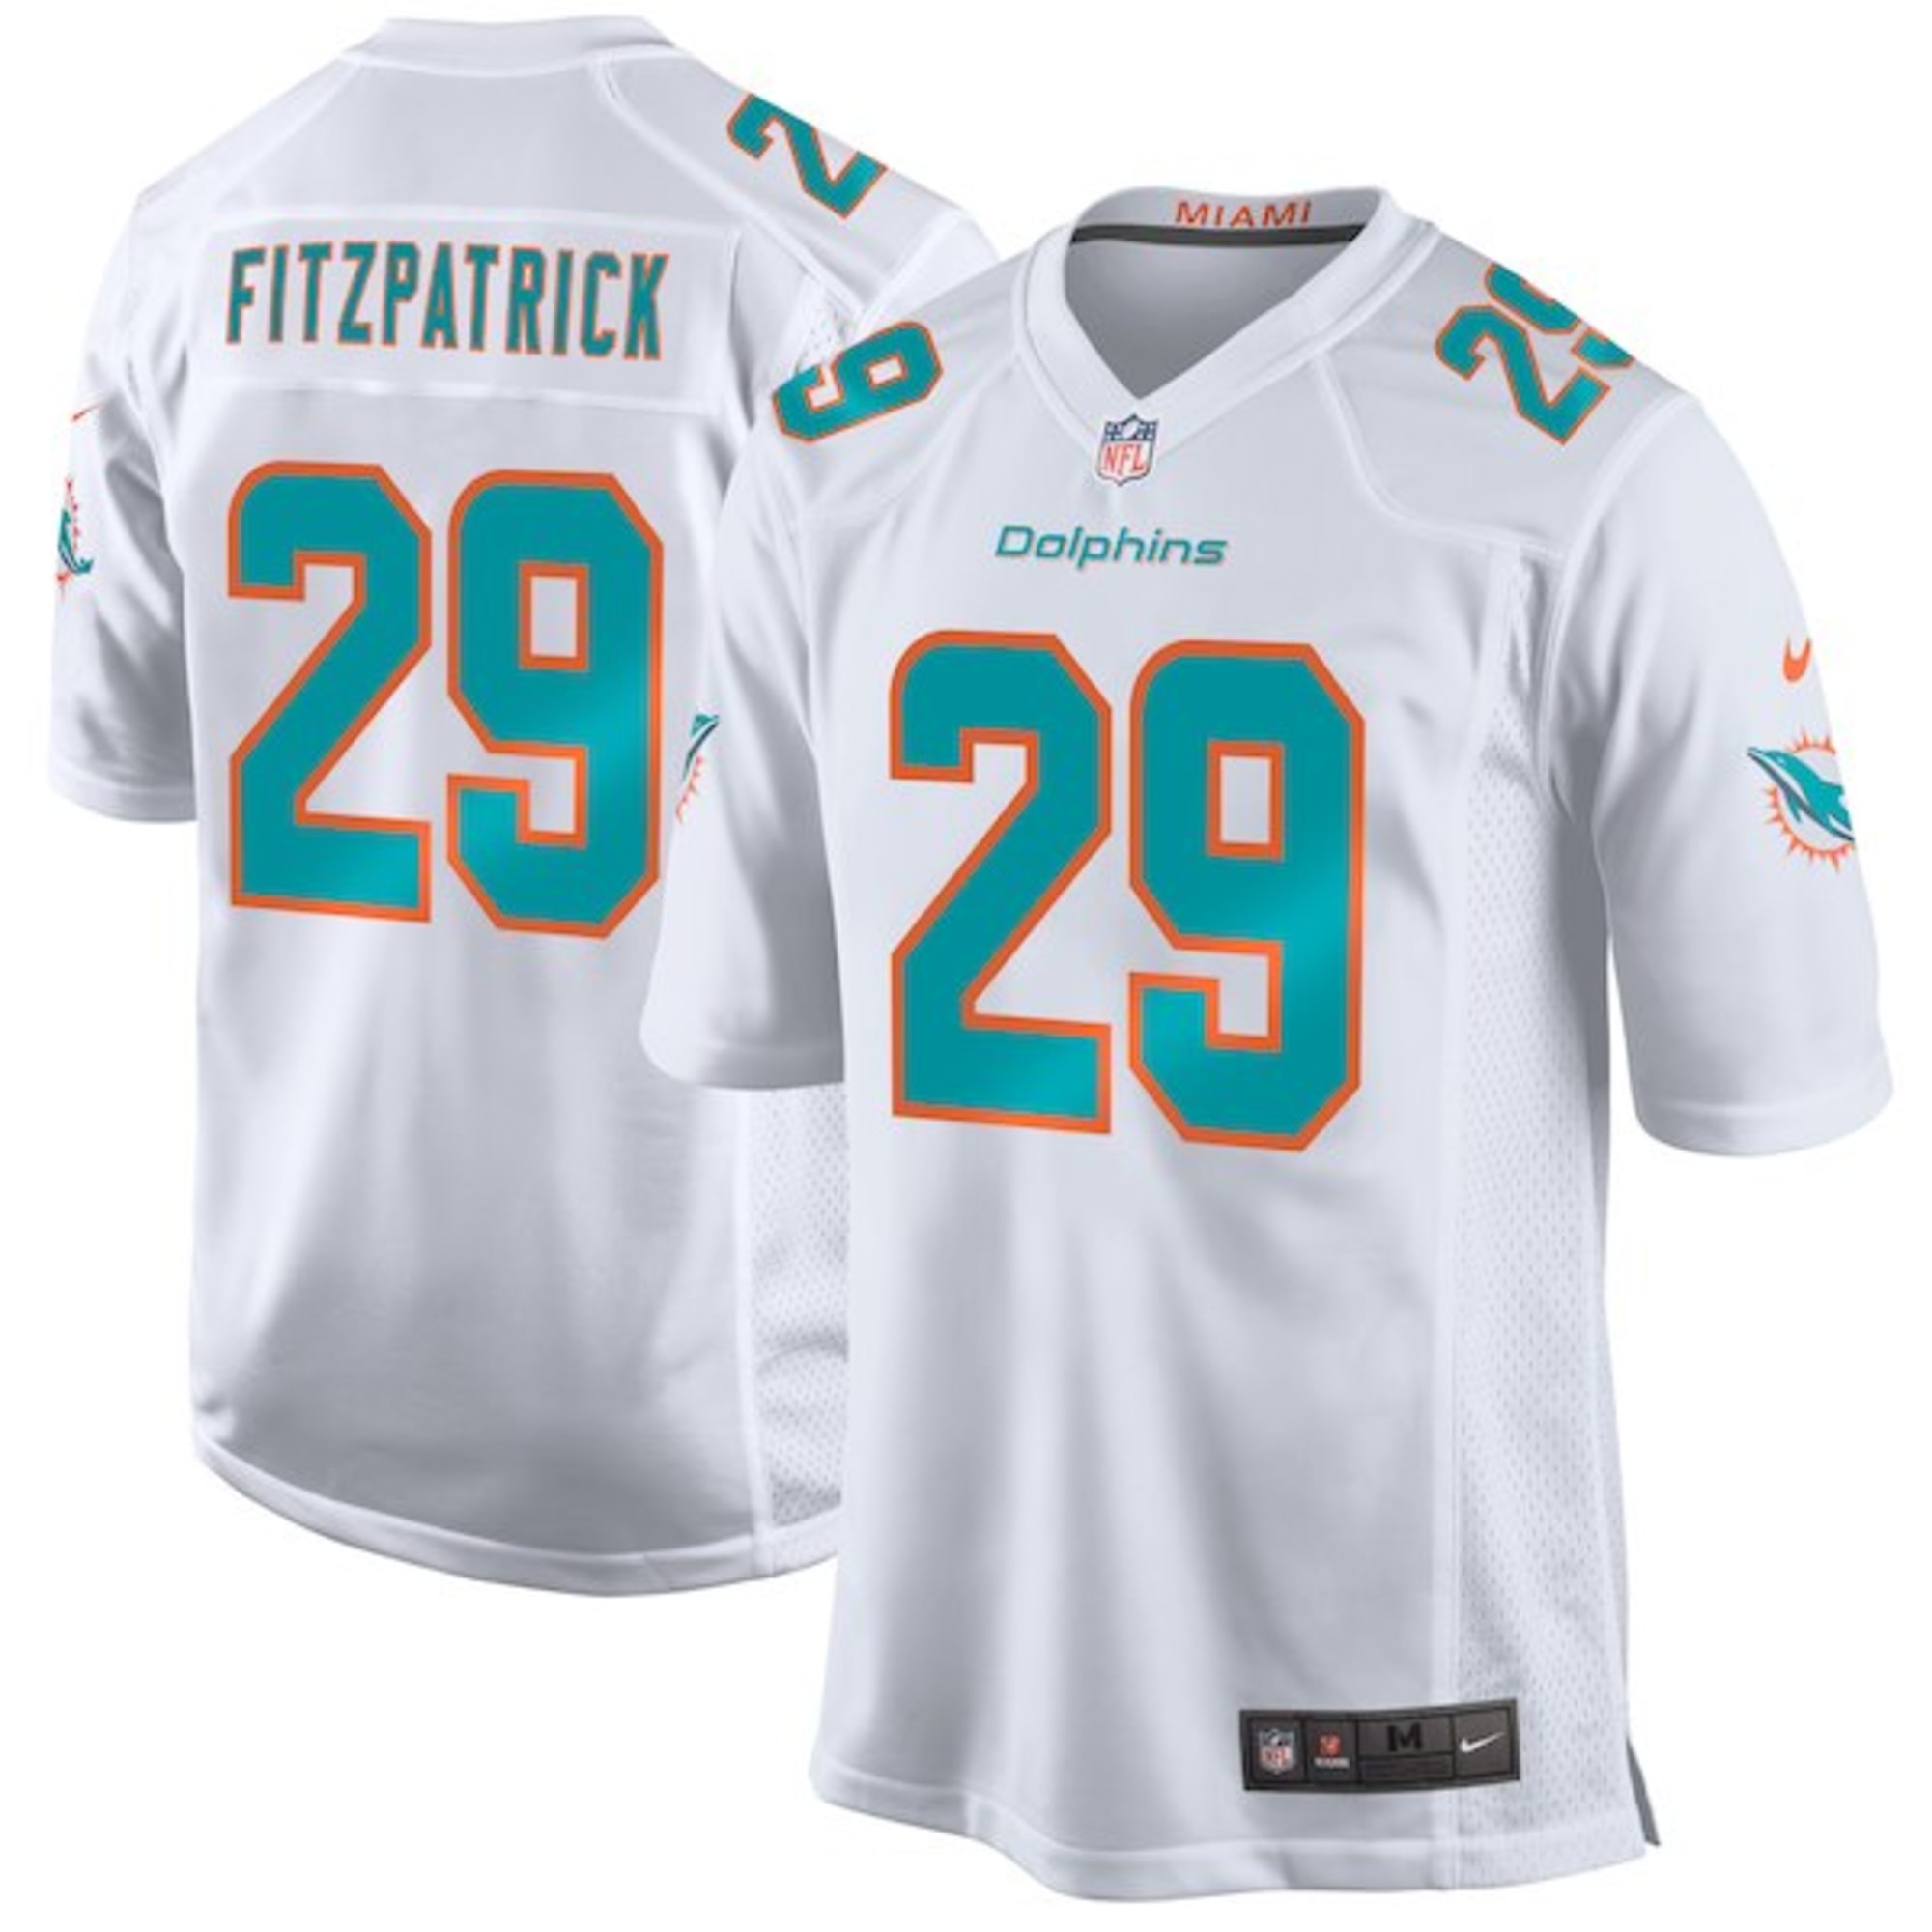 The safest Miami Dolphins jerseys you can buy in 2018